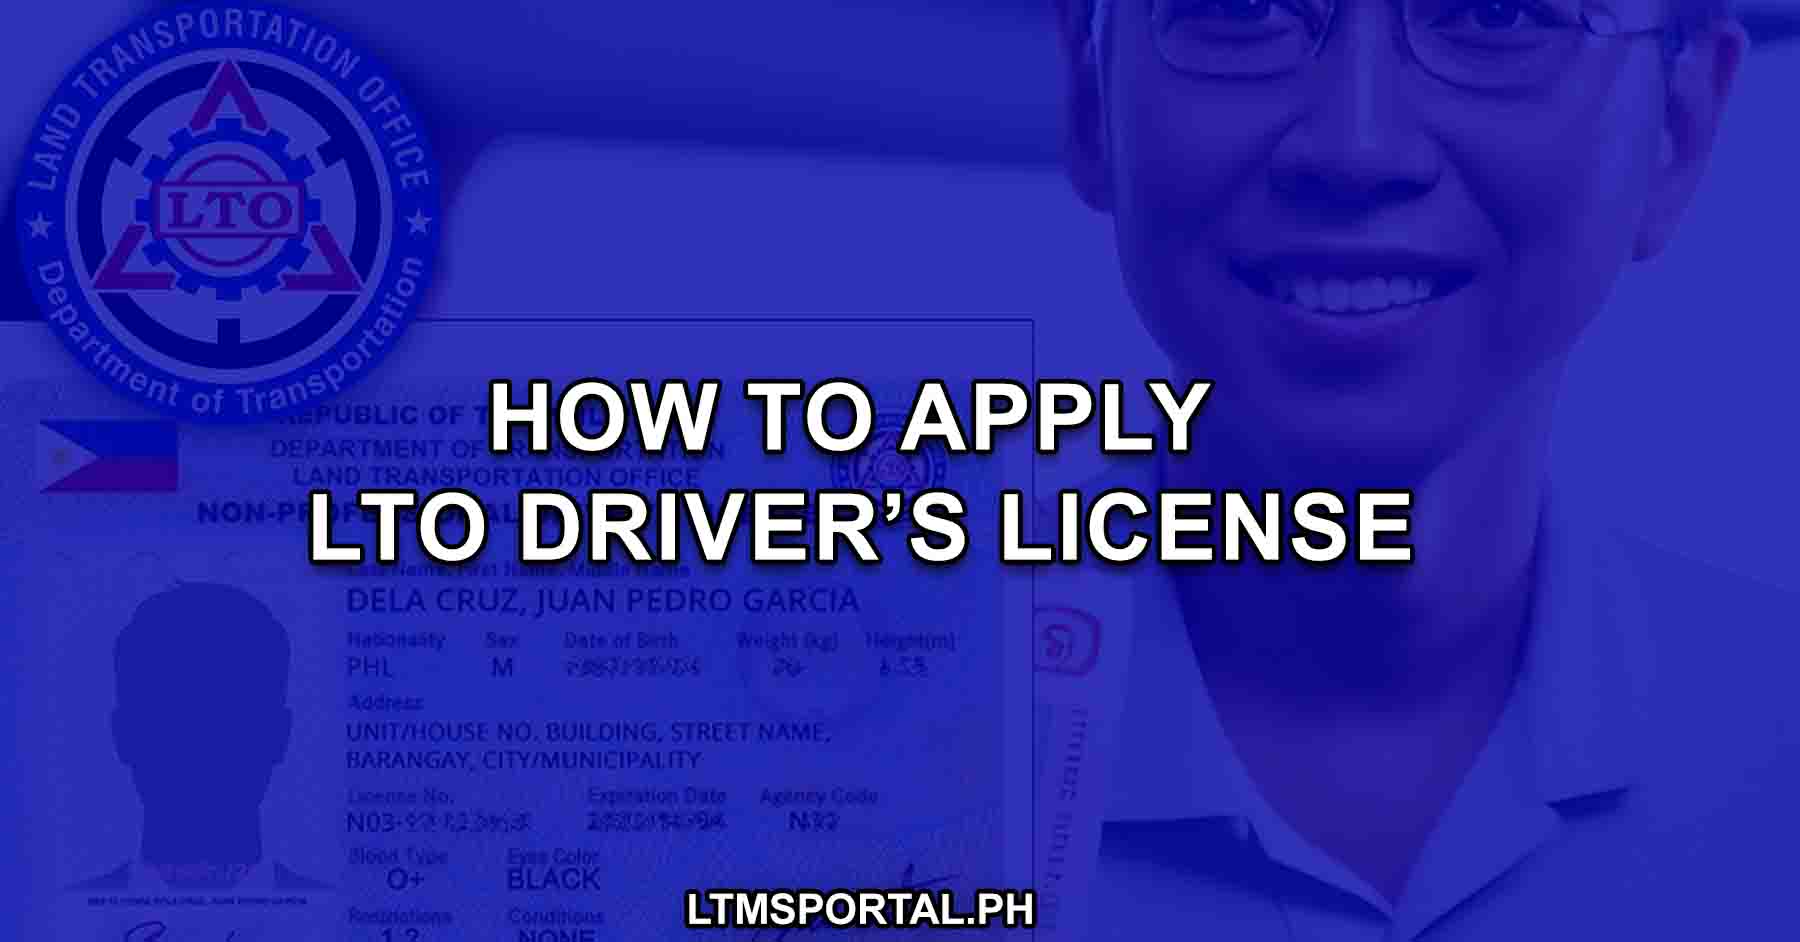 how to apply for a new lto driver's license in the philippines